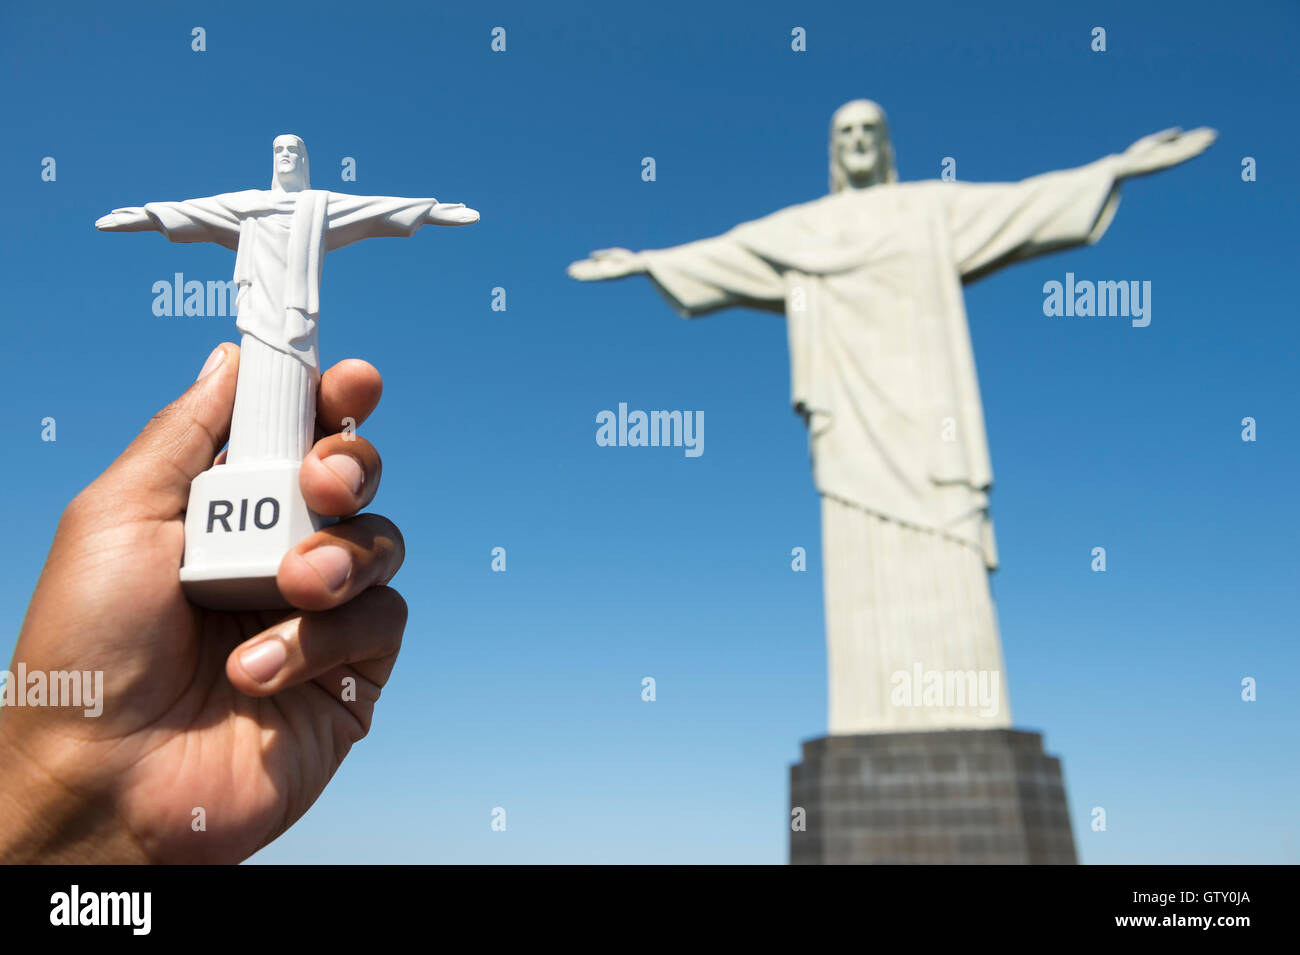 RIO DE JANEIRO - MARCH 05, 2016: Hand holding tourist souvenir in front of Statue of Christ the Redeemer at the top of Corcovado Stock Photo